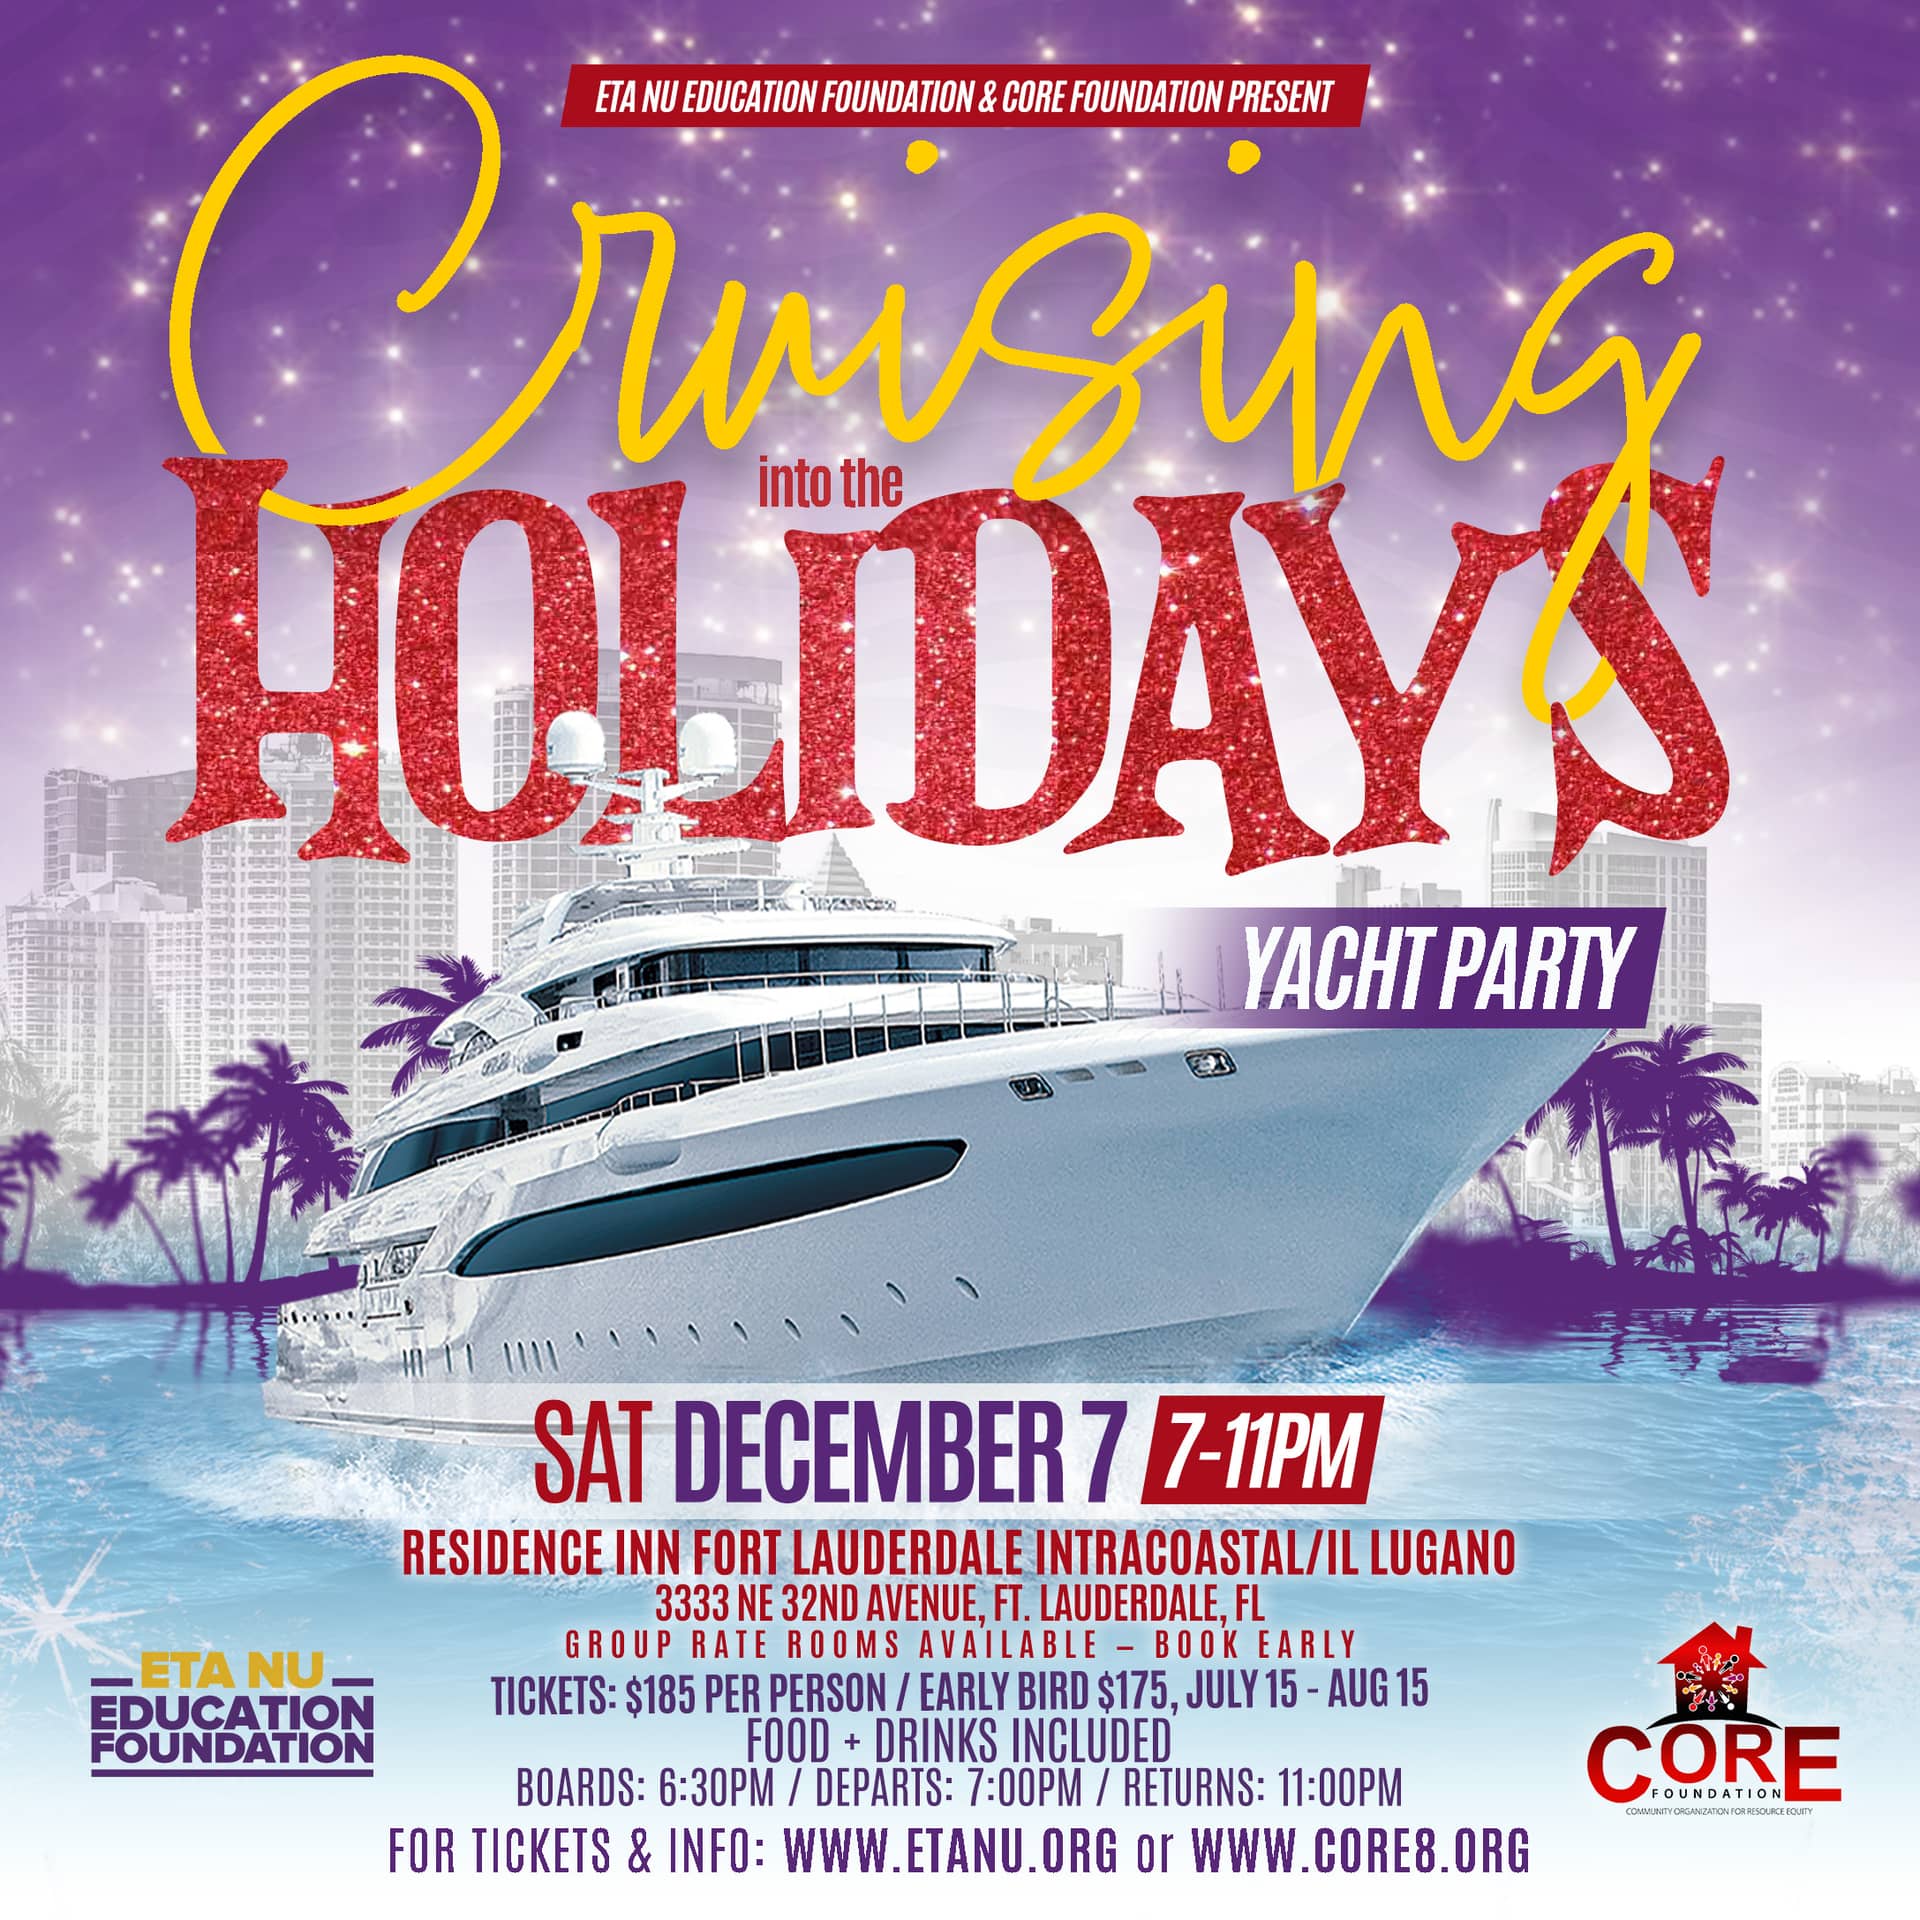 Cruising Into the Holidays Yacht Party